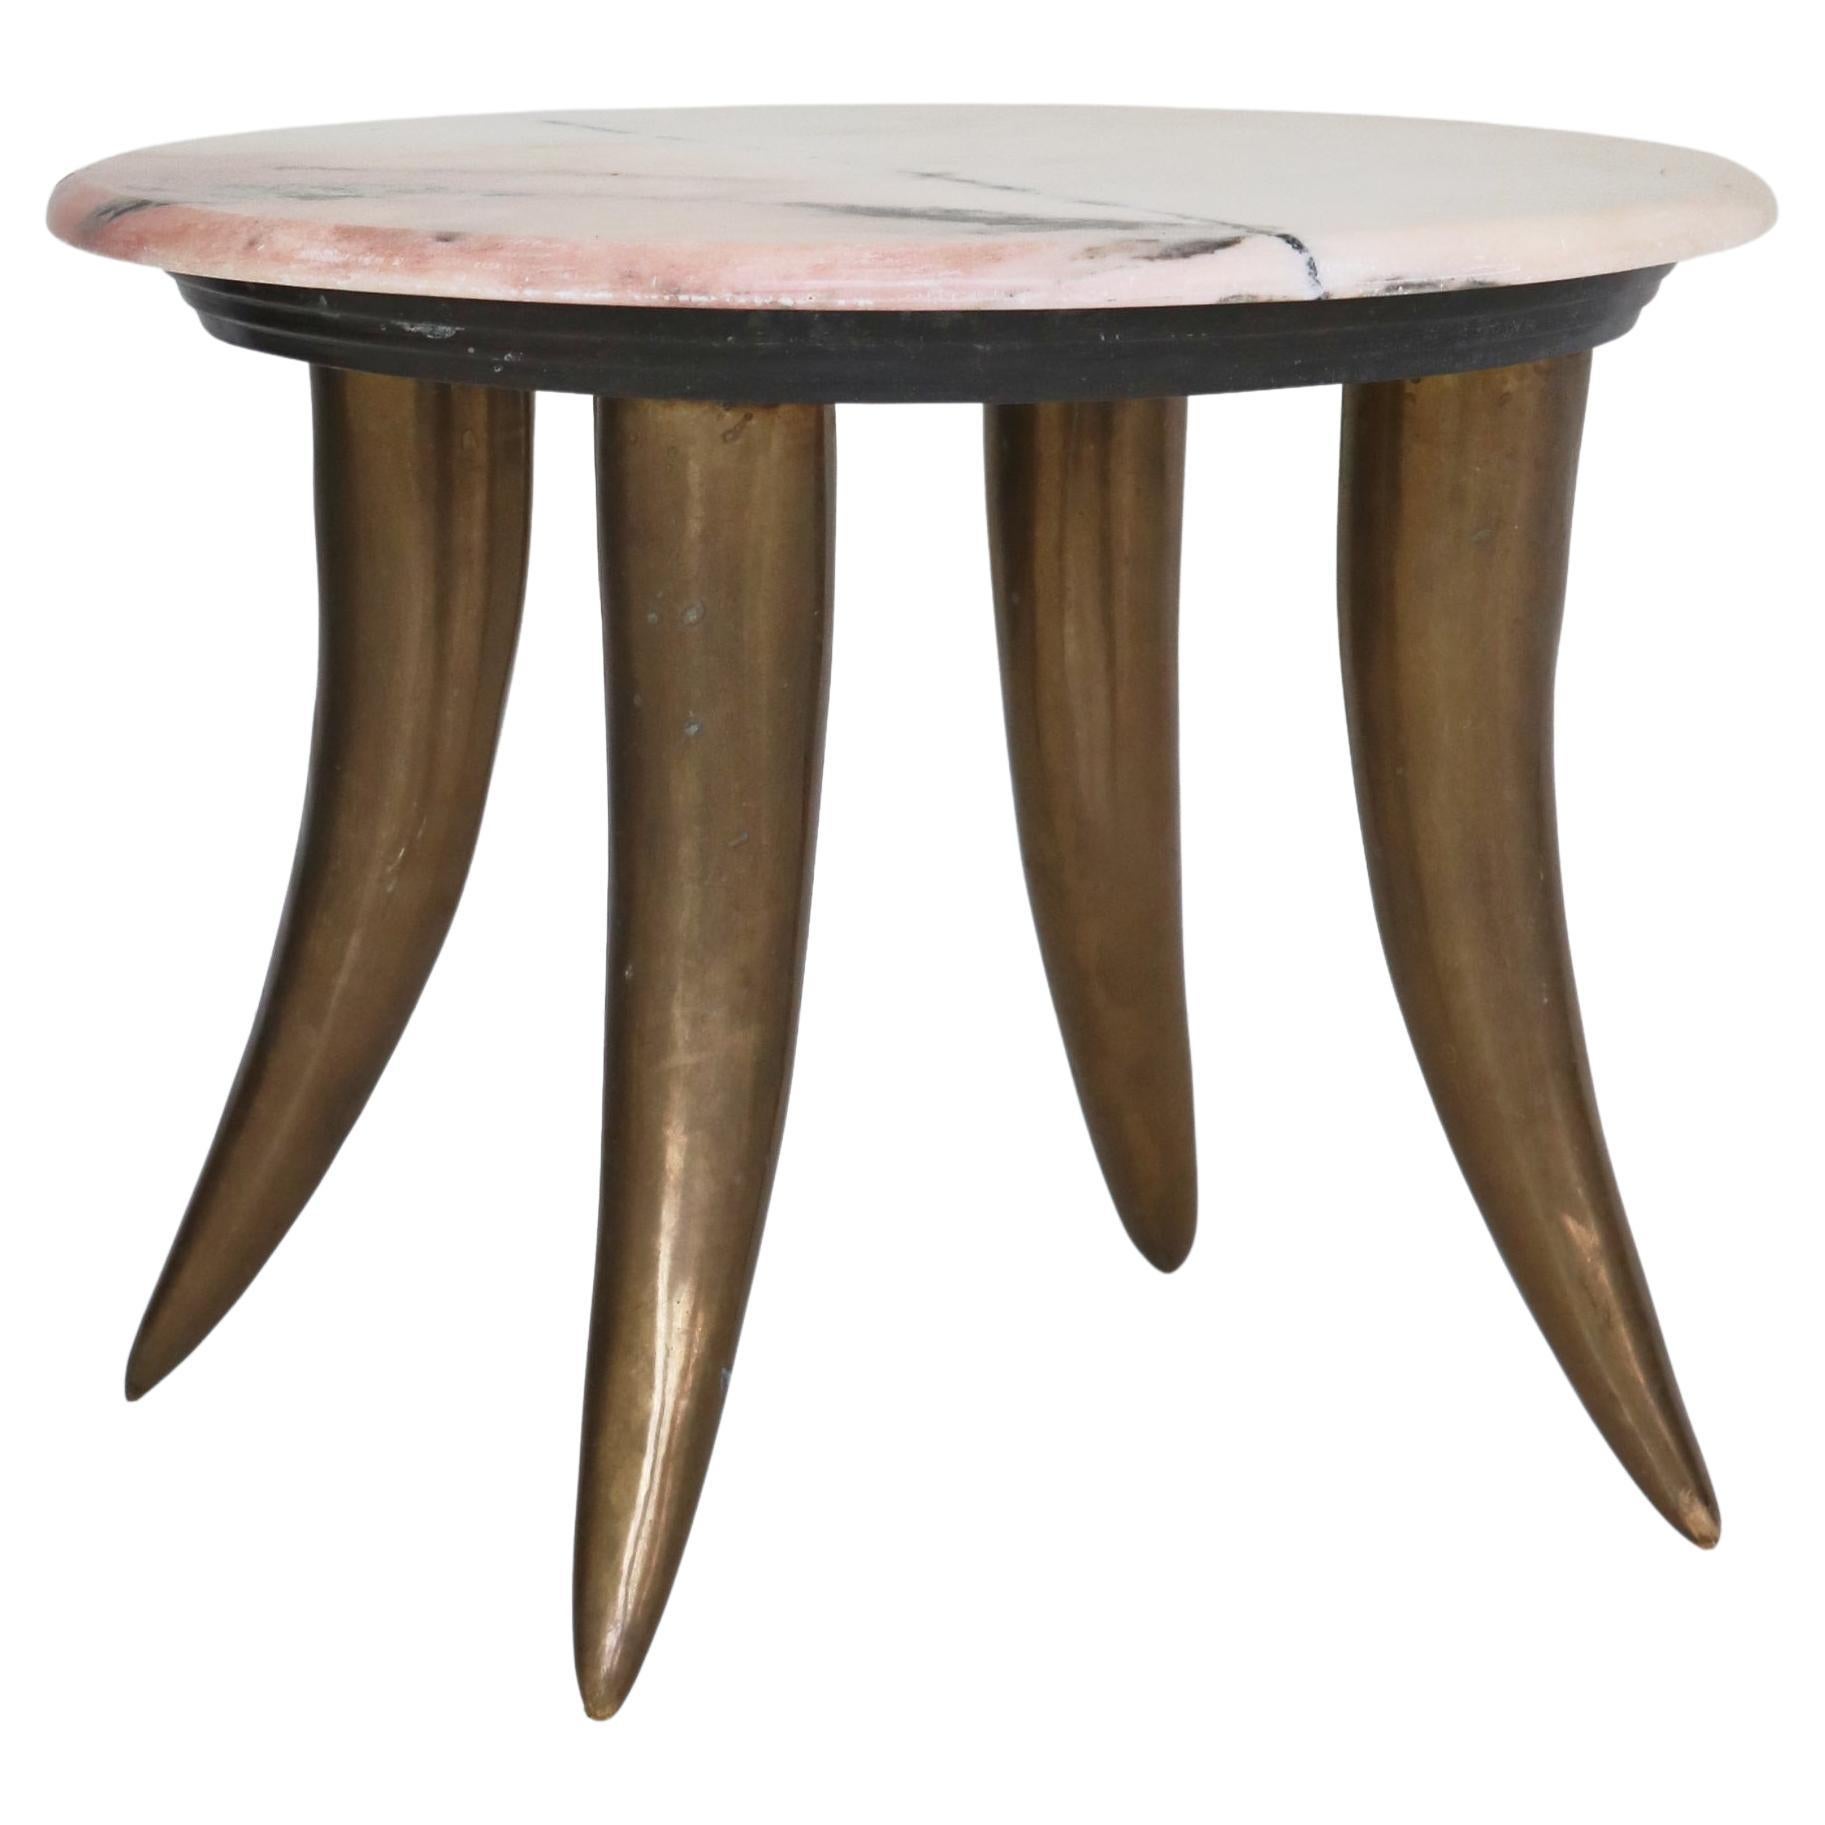 Italian Coffee Table Pink Marble & Brass Sabre Legs, Angelo Mangiarotti, 1960s For Sale